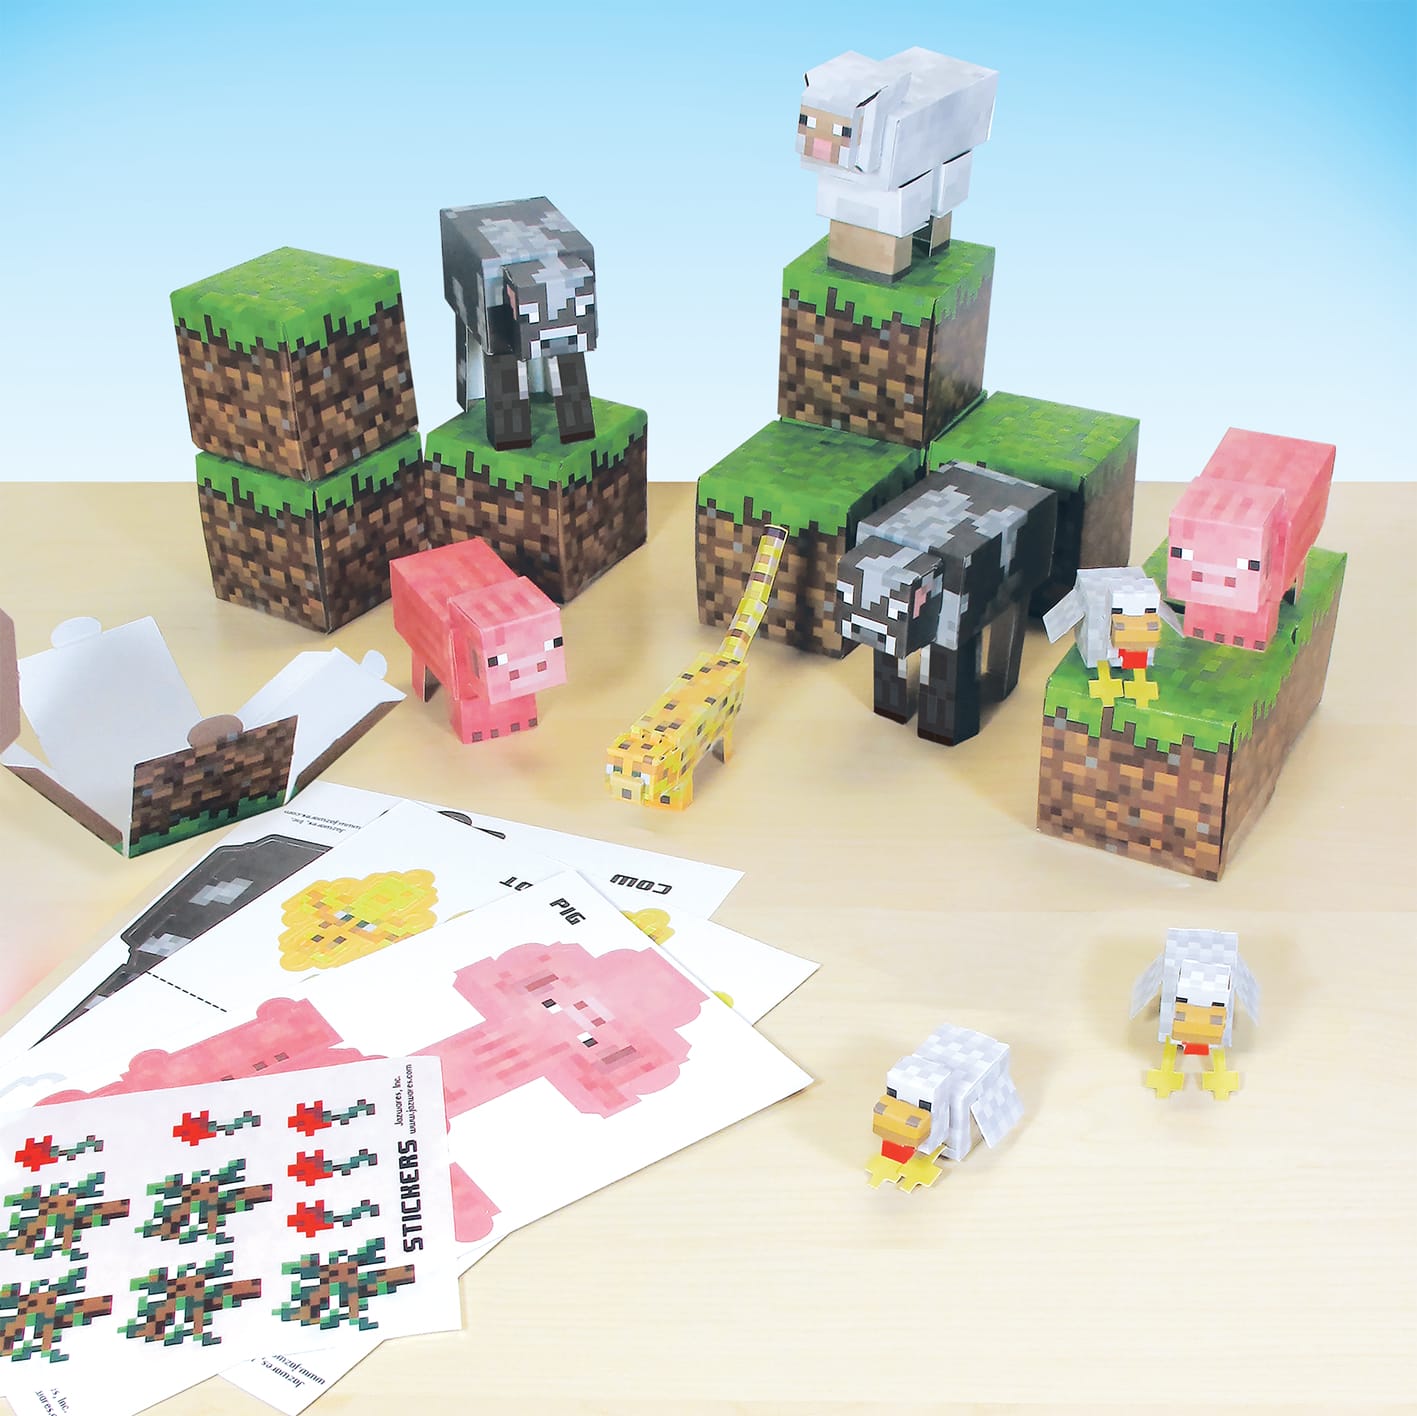  Minecraft Papercraft Utility Pack, Over 30 Pieces : Toys & Games